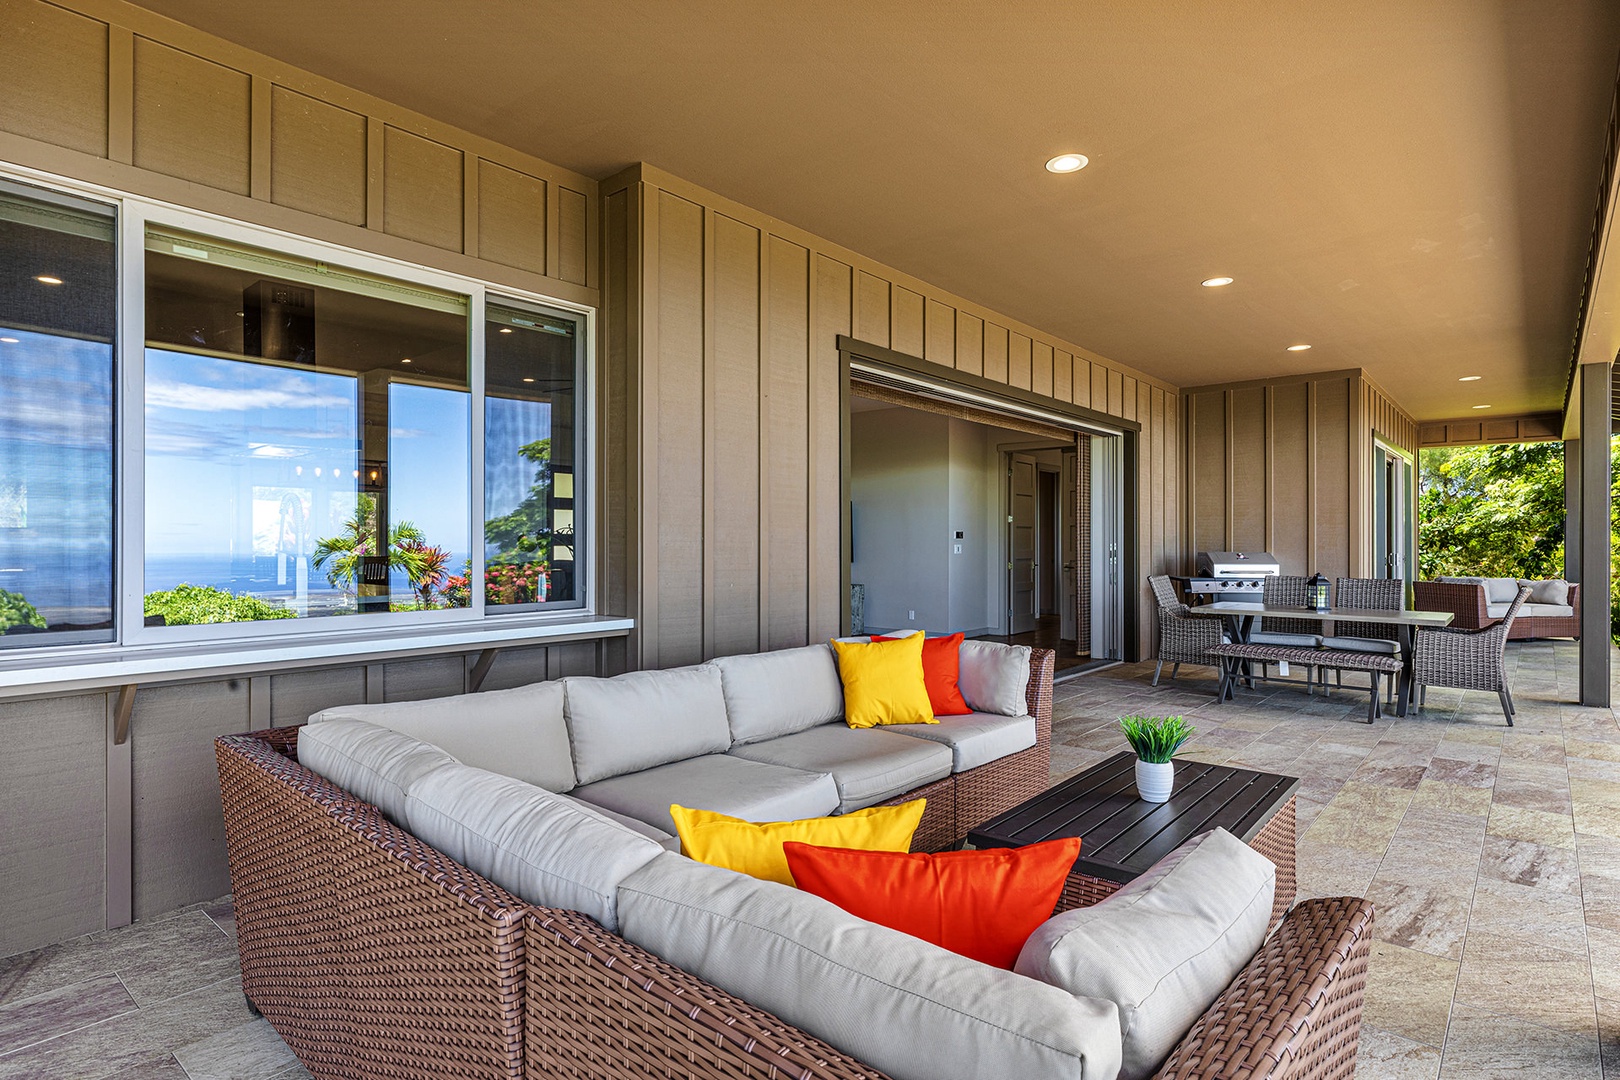 Lanai with ample outdoor furniture